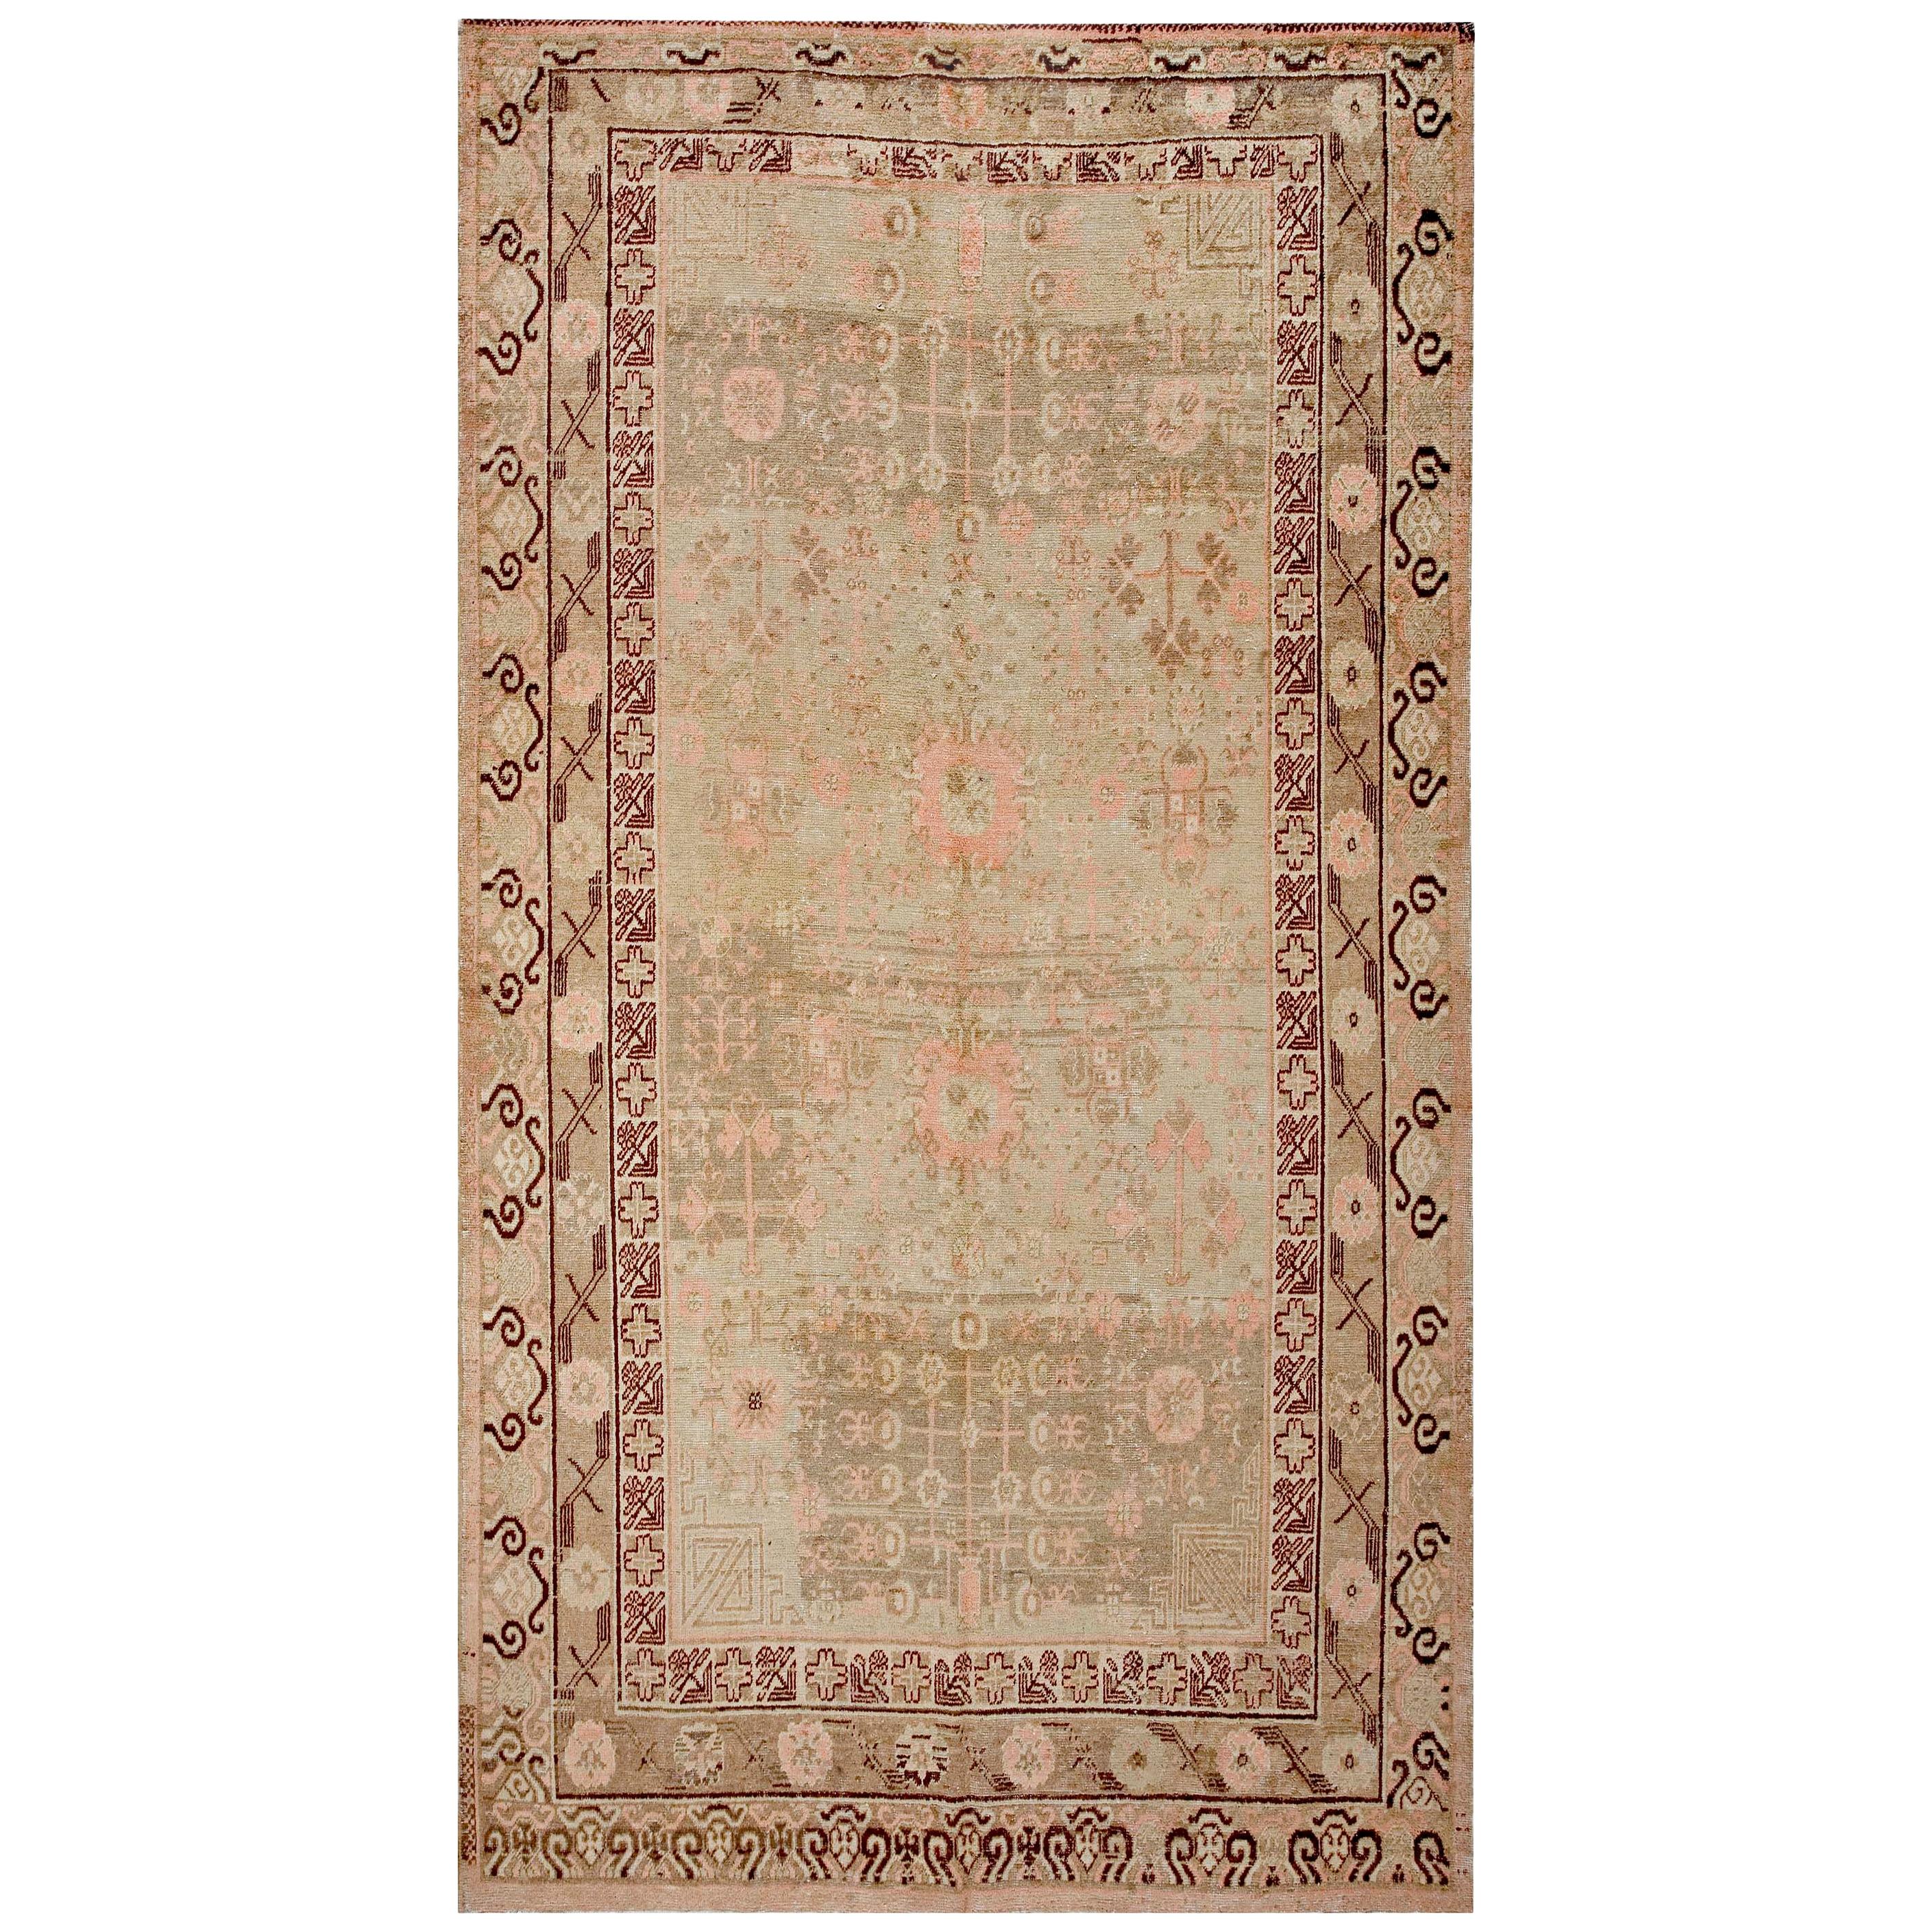 Early 20th Century Central Asian Chinese Khotan Carpet ( 6'4" x 12 -193 x 365 ) For Sale